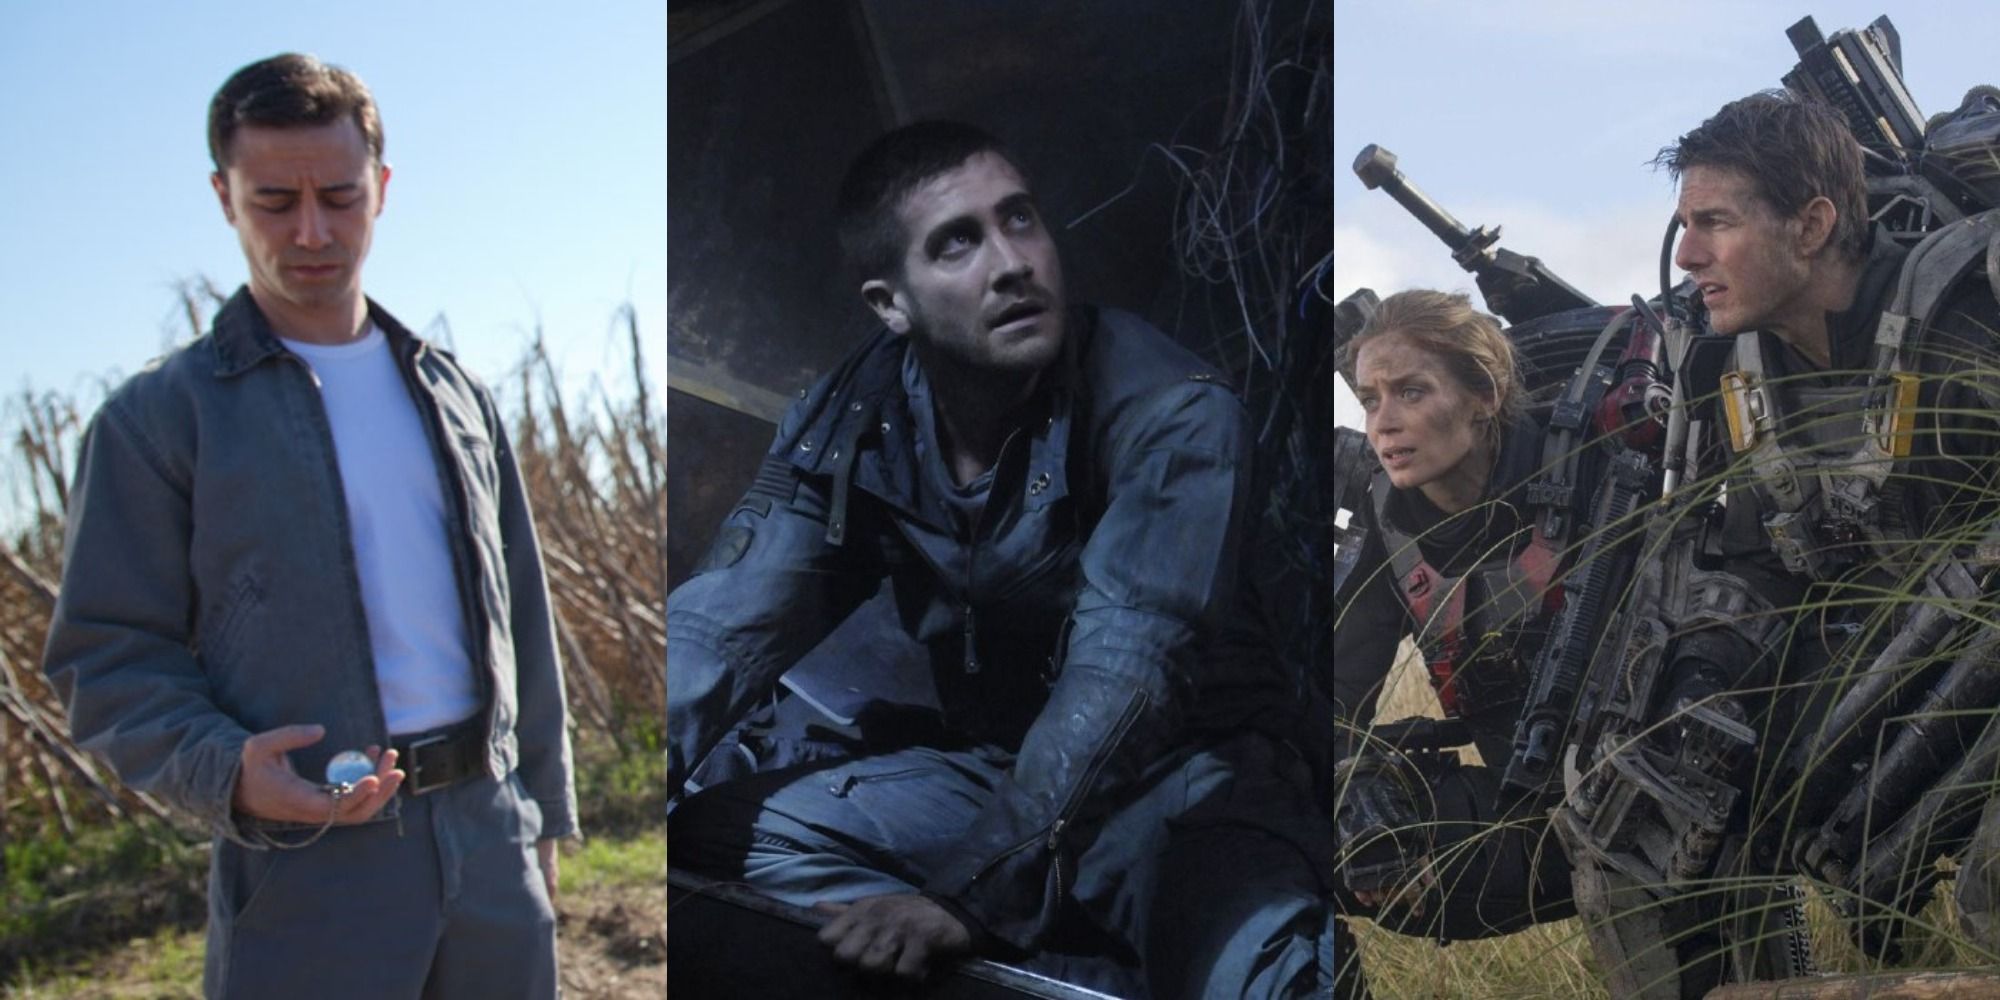 Side by side images of Joseph Gordon-Levitt in Looper, Jake Gyllenhaal in Source Code and Emily Blunt and Tom Cruise in Edge of Tomorrow